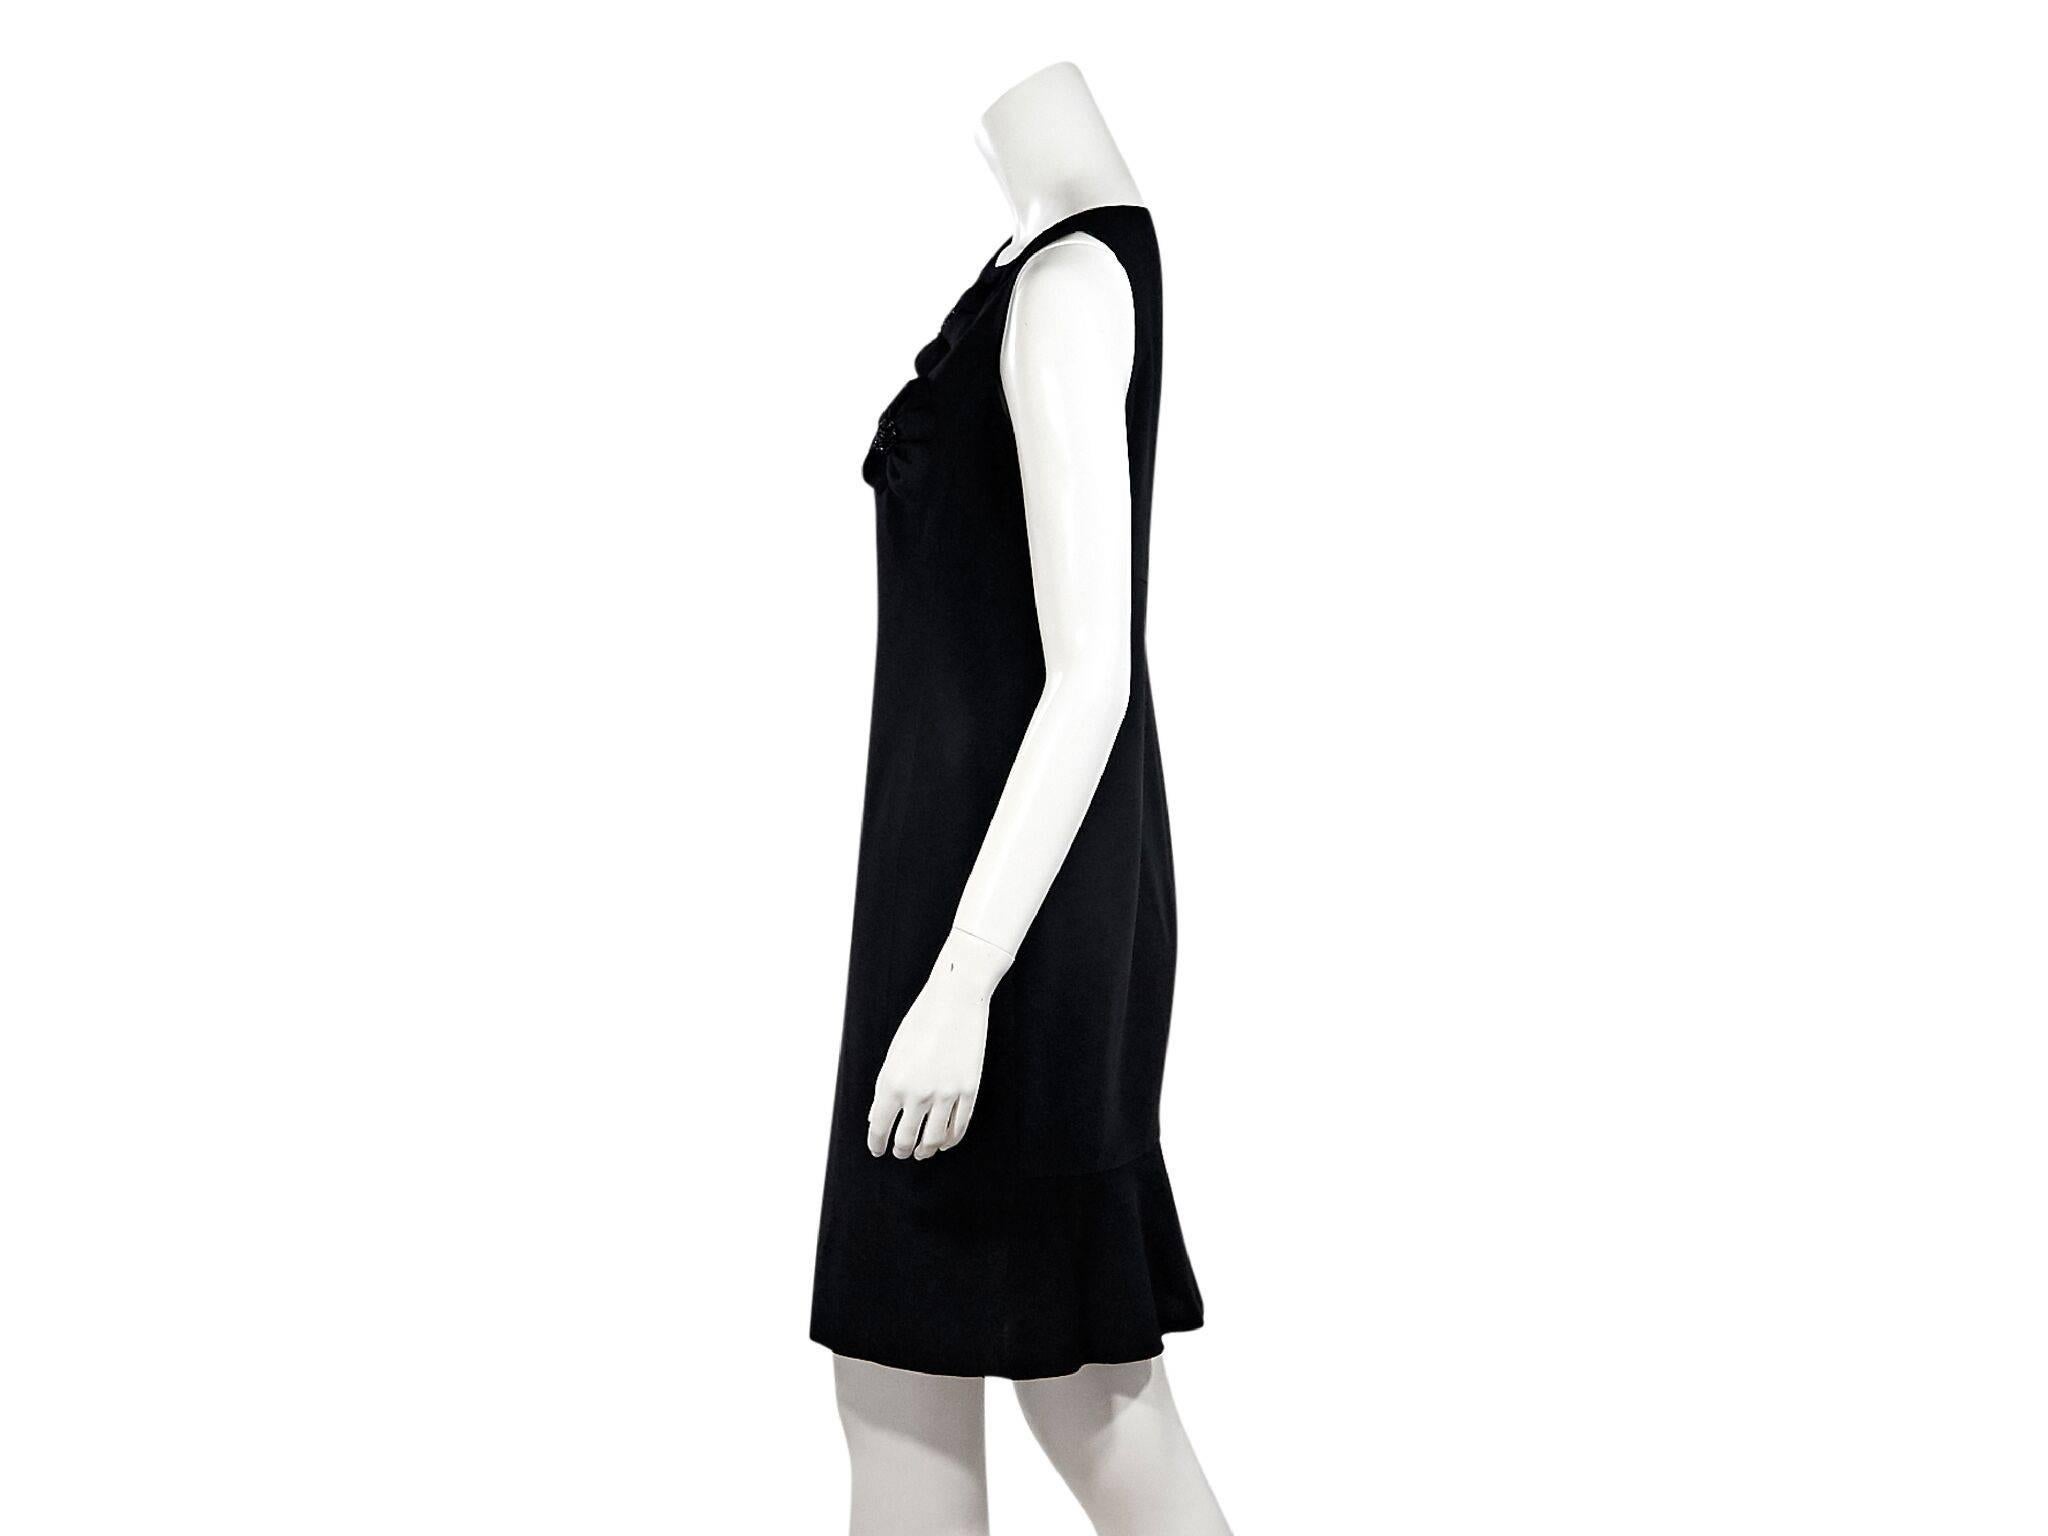 Product details:  Black wool sheath dress by Valentino.  Accented with tonal embellished floral applique.  Asymmetrical v-neck.  Sleeveless.  Concealed back zip closure.  38